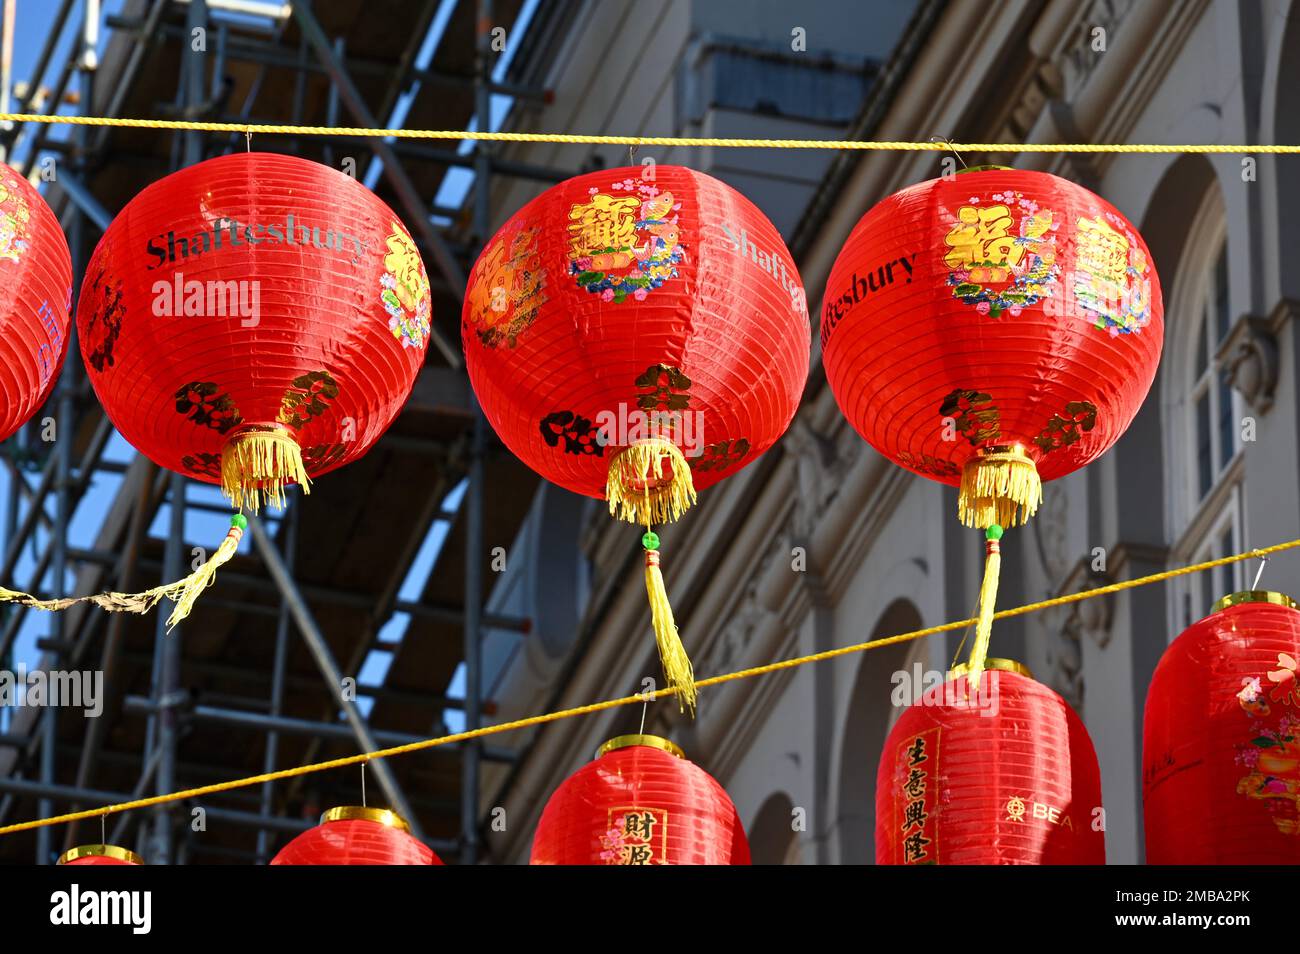 New Red lanterns were hung in Gerrard Street to welcome in the year of the Rabbit. Chinatown, London. UK Stock Photo